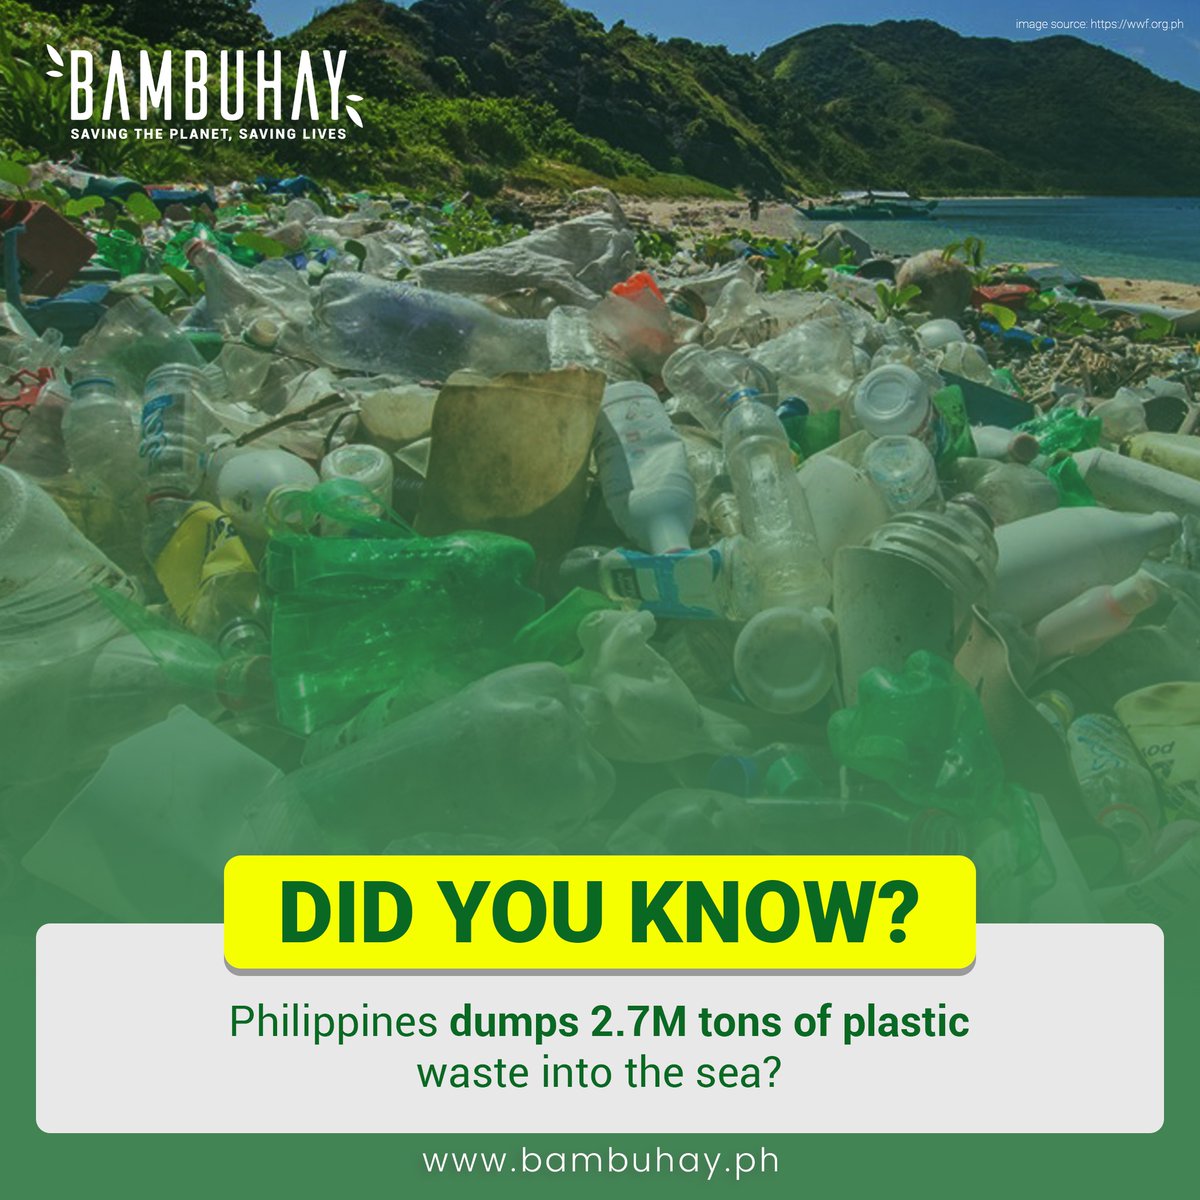 DID YOU KNOW?
Philippines dumps 2.7M tons of plastic waste into the sea?

For more information,
bambuhay.ph

#PlasticFreeStartsWithMe #breakfreefromplastic #savingtheplanet #savinglives #plantable #FreedomFromPlastic #Bambuhay #Bamboo #BeatPlasticPollution